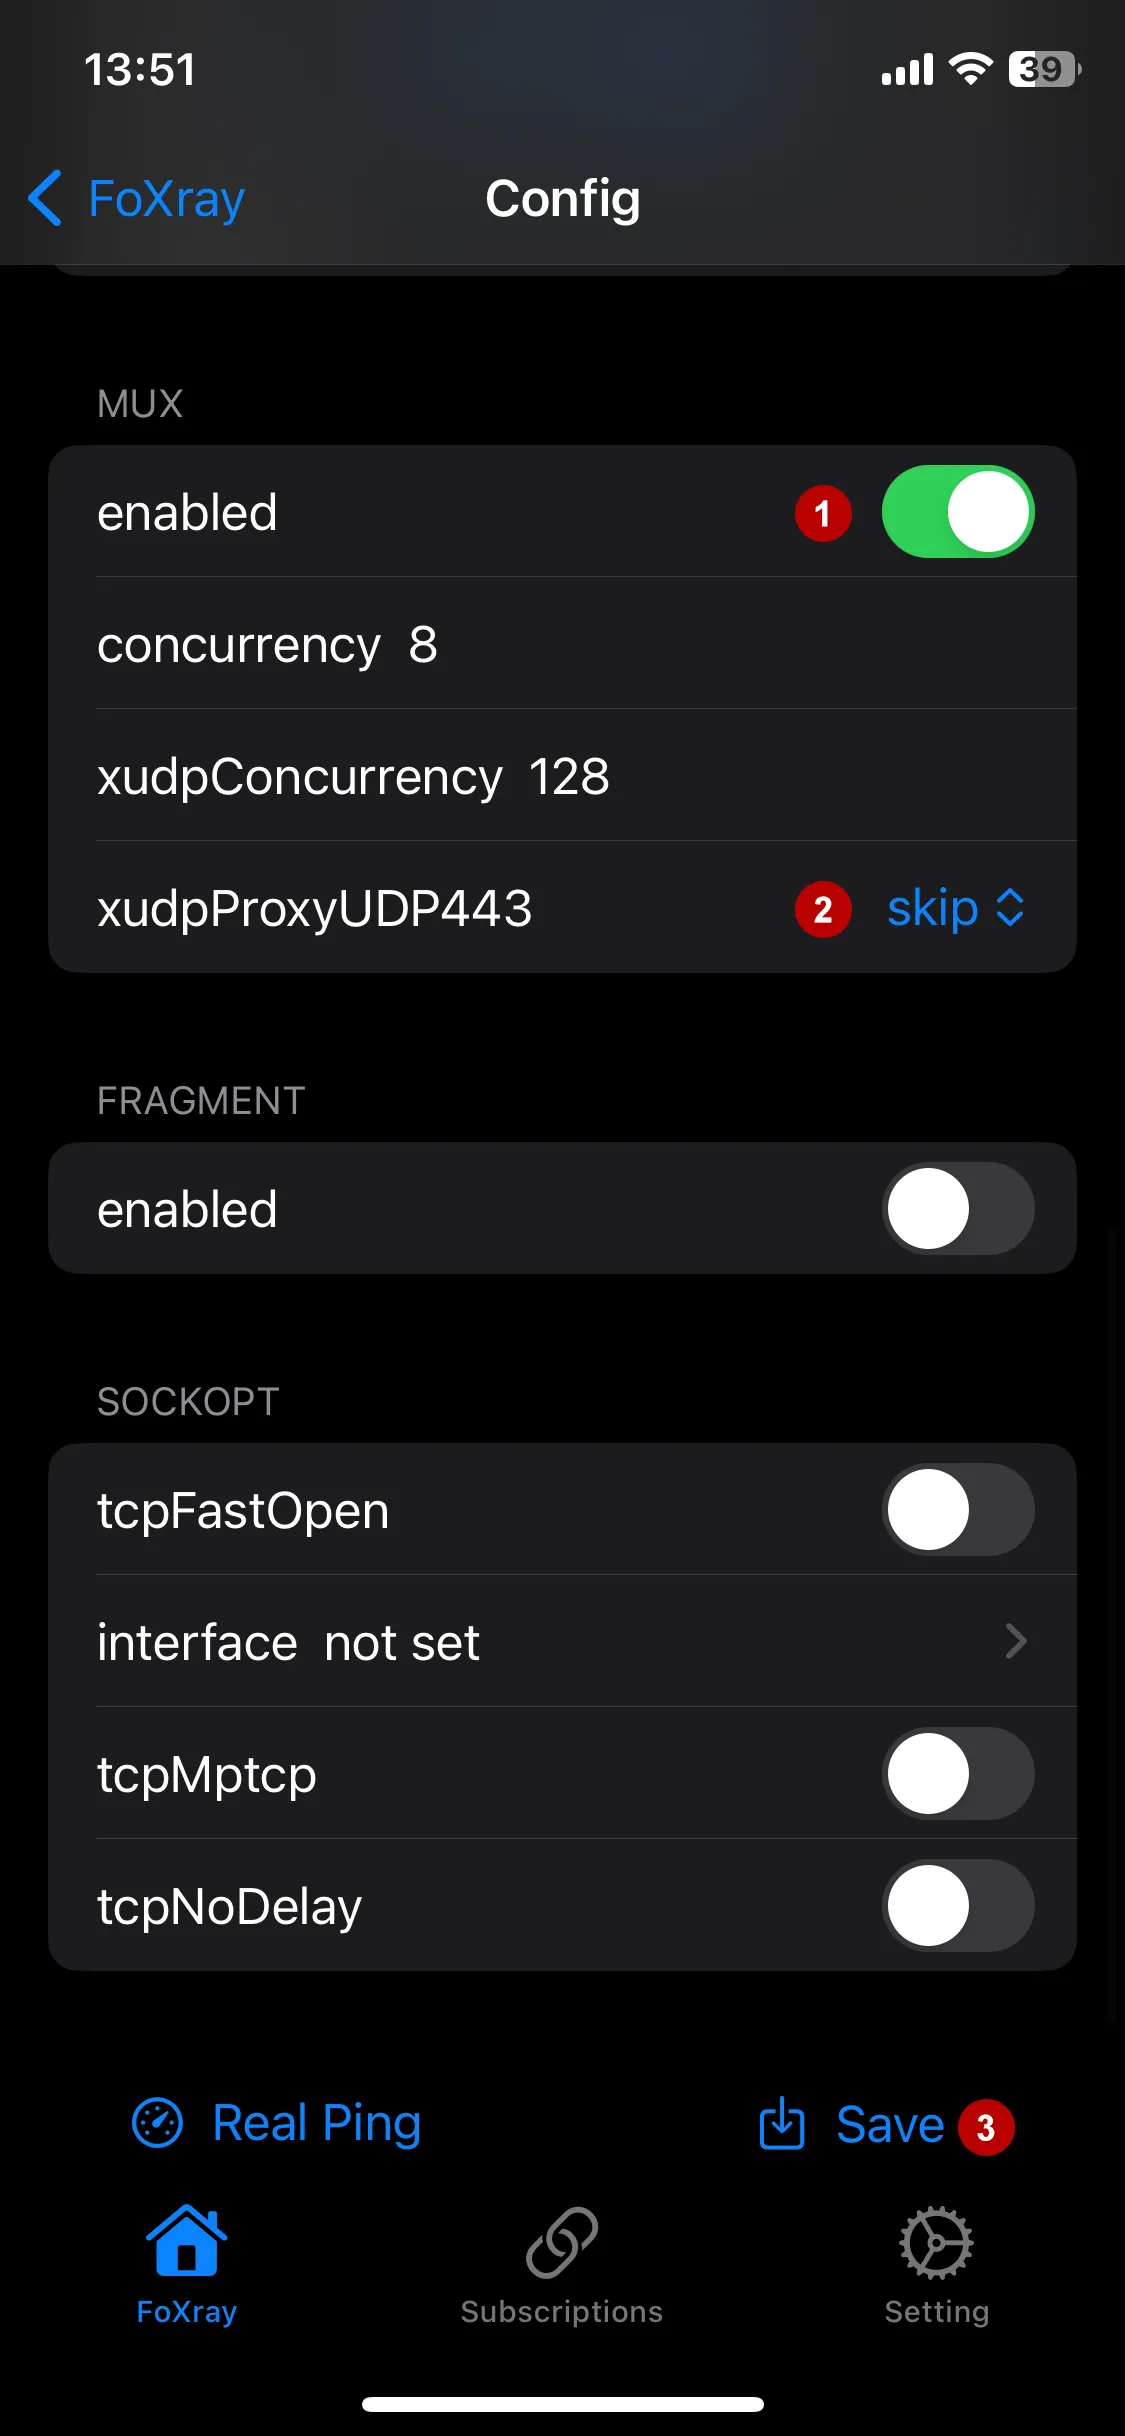 Enabling xVPN connection multiplexing in Foxray on iOS